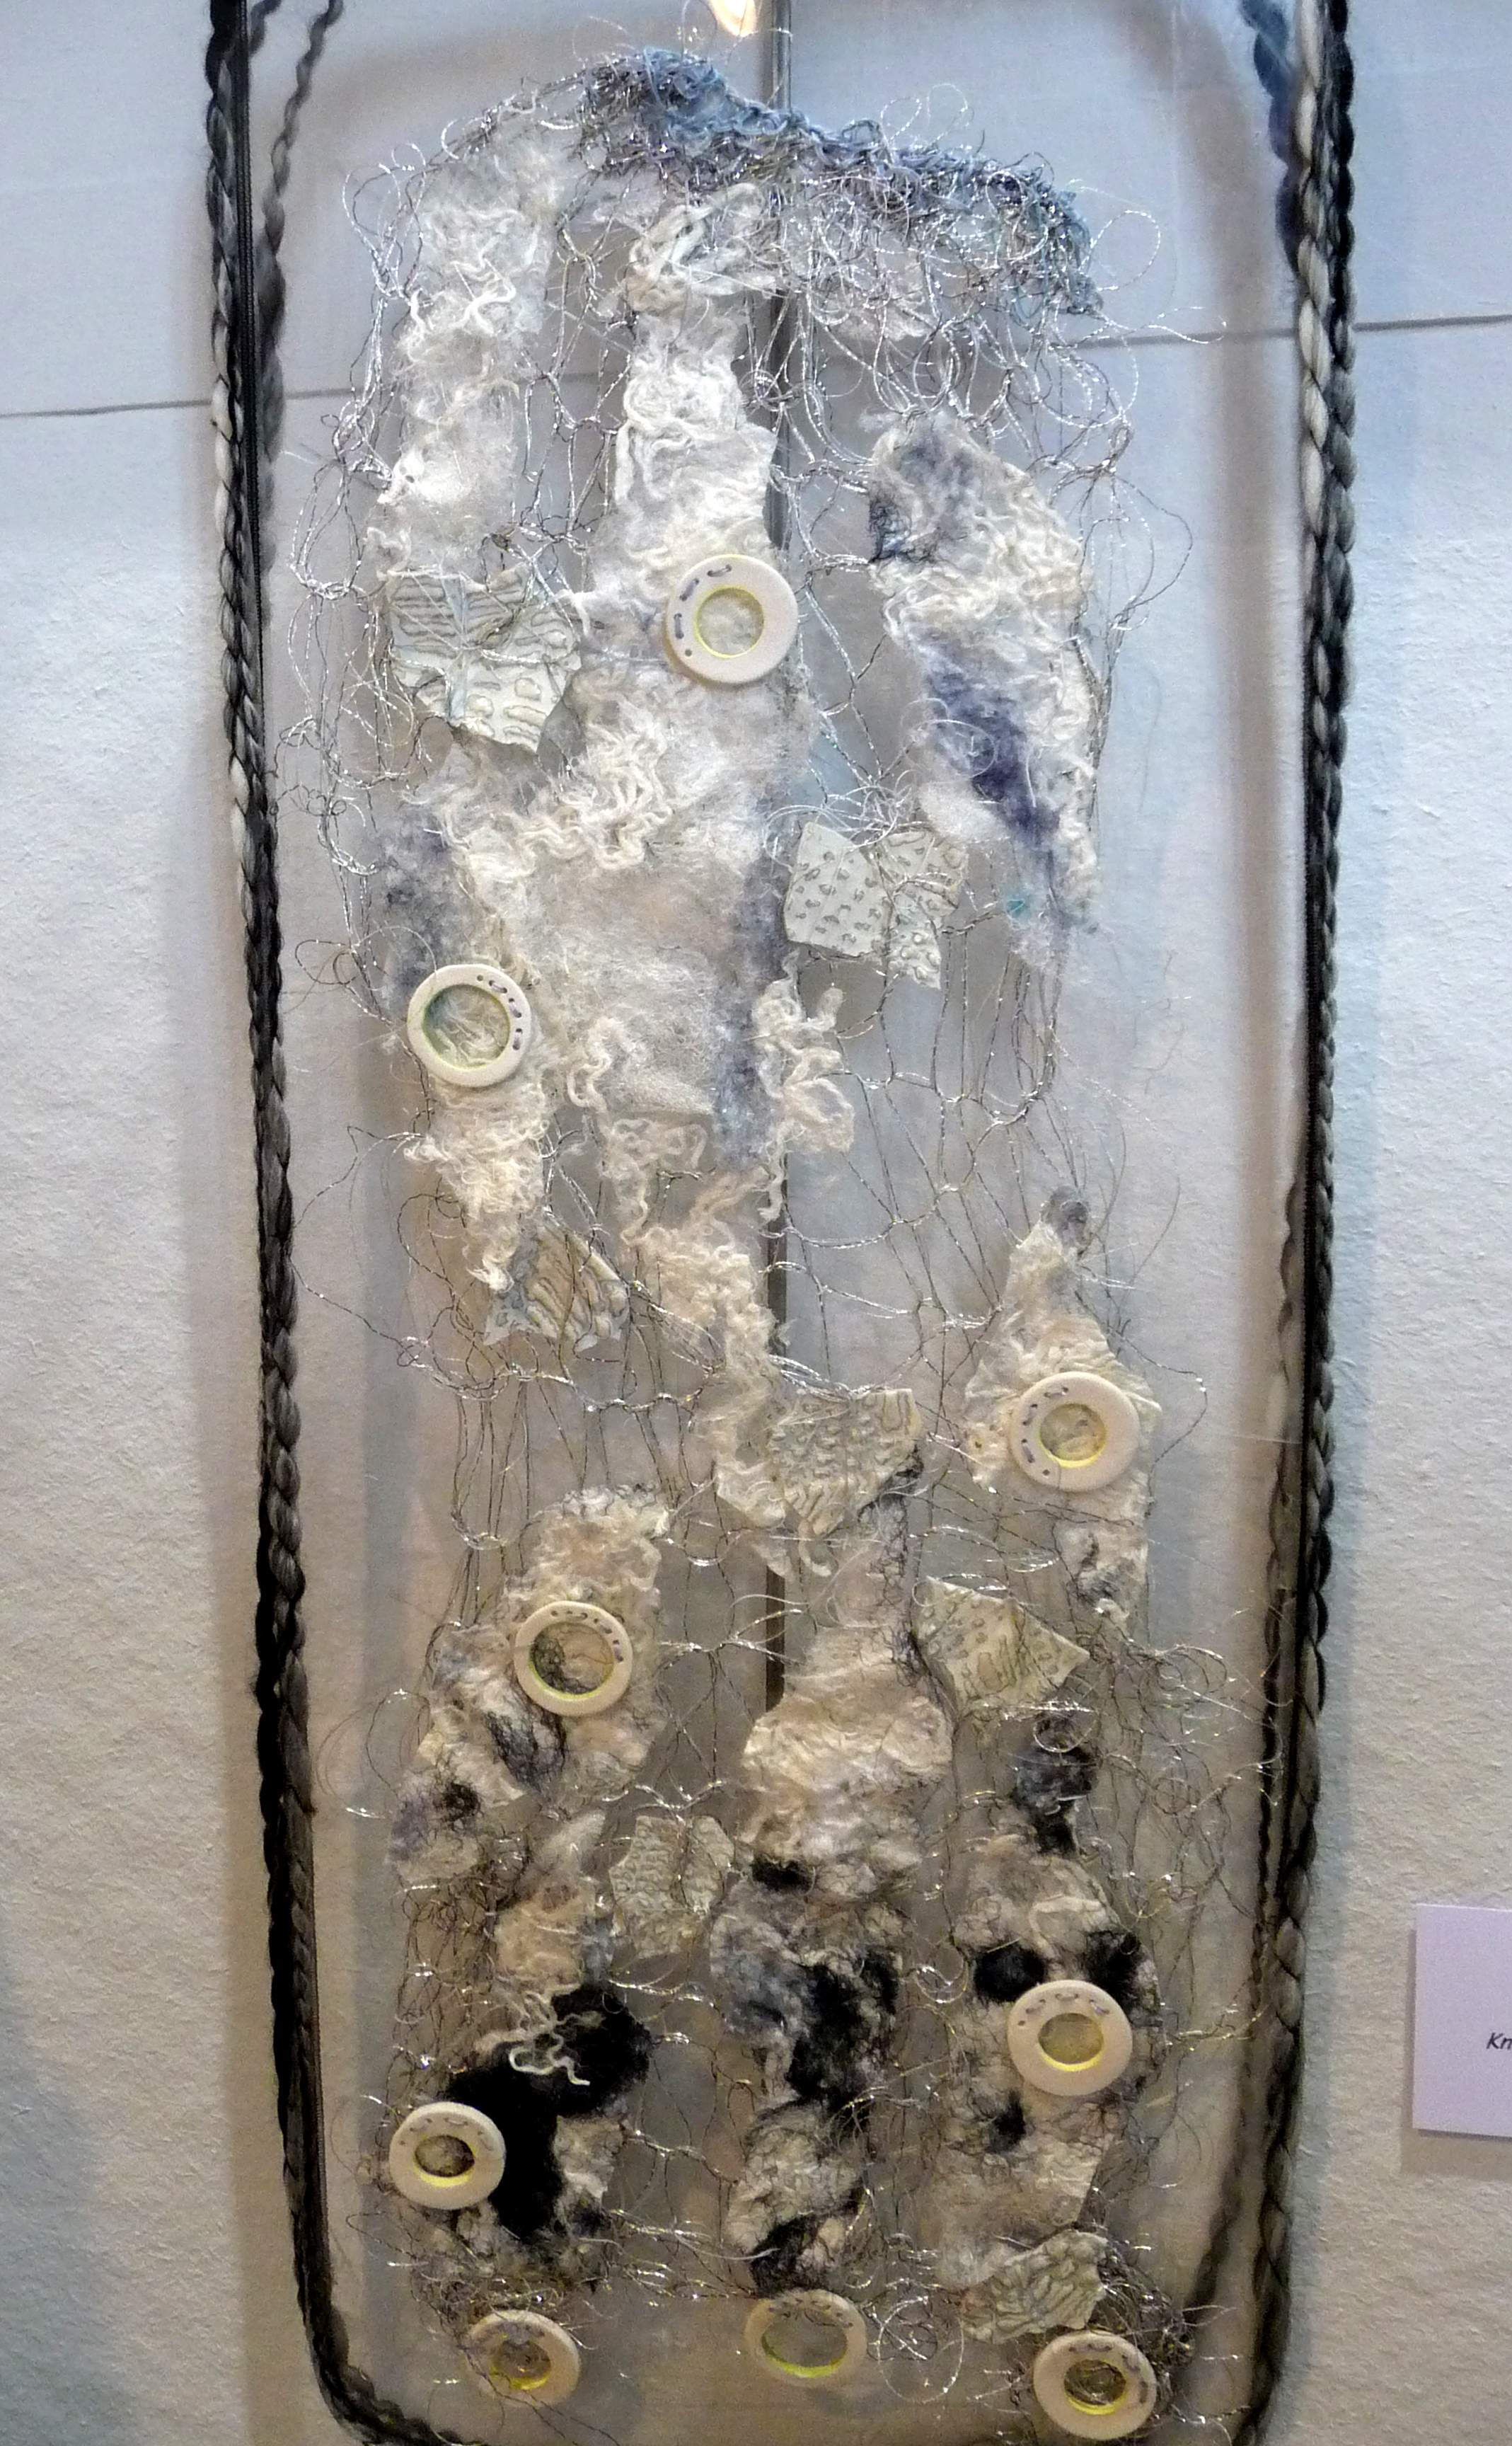 MOON LANDSCAPE by Vera Morgan, knitted wire, ceramics and felt